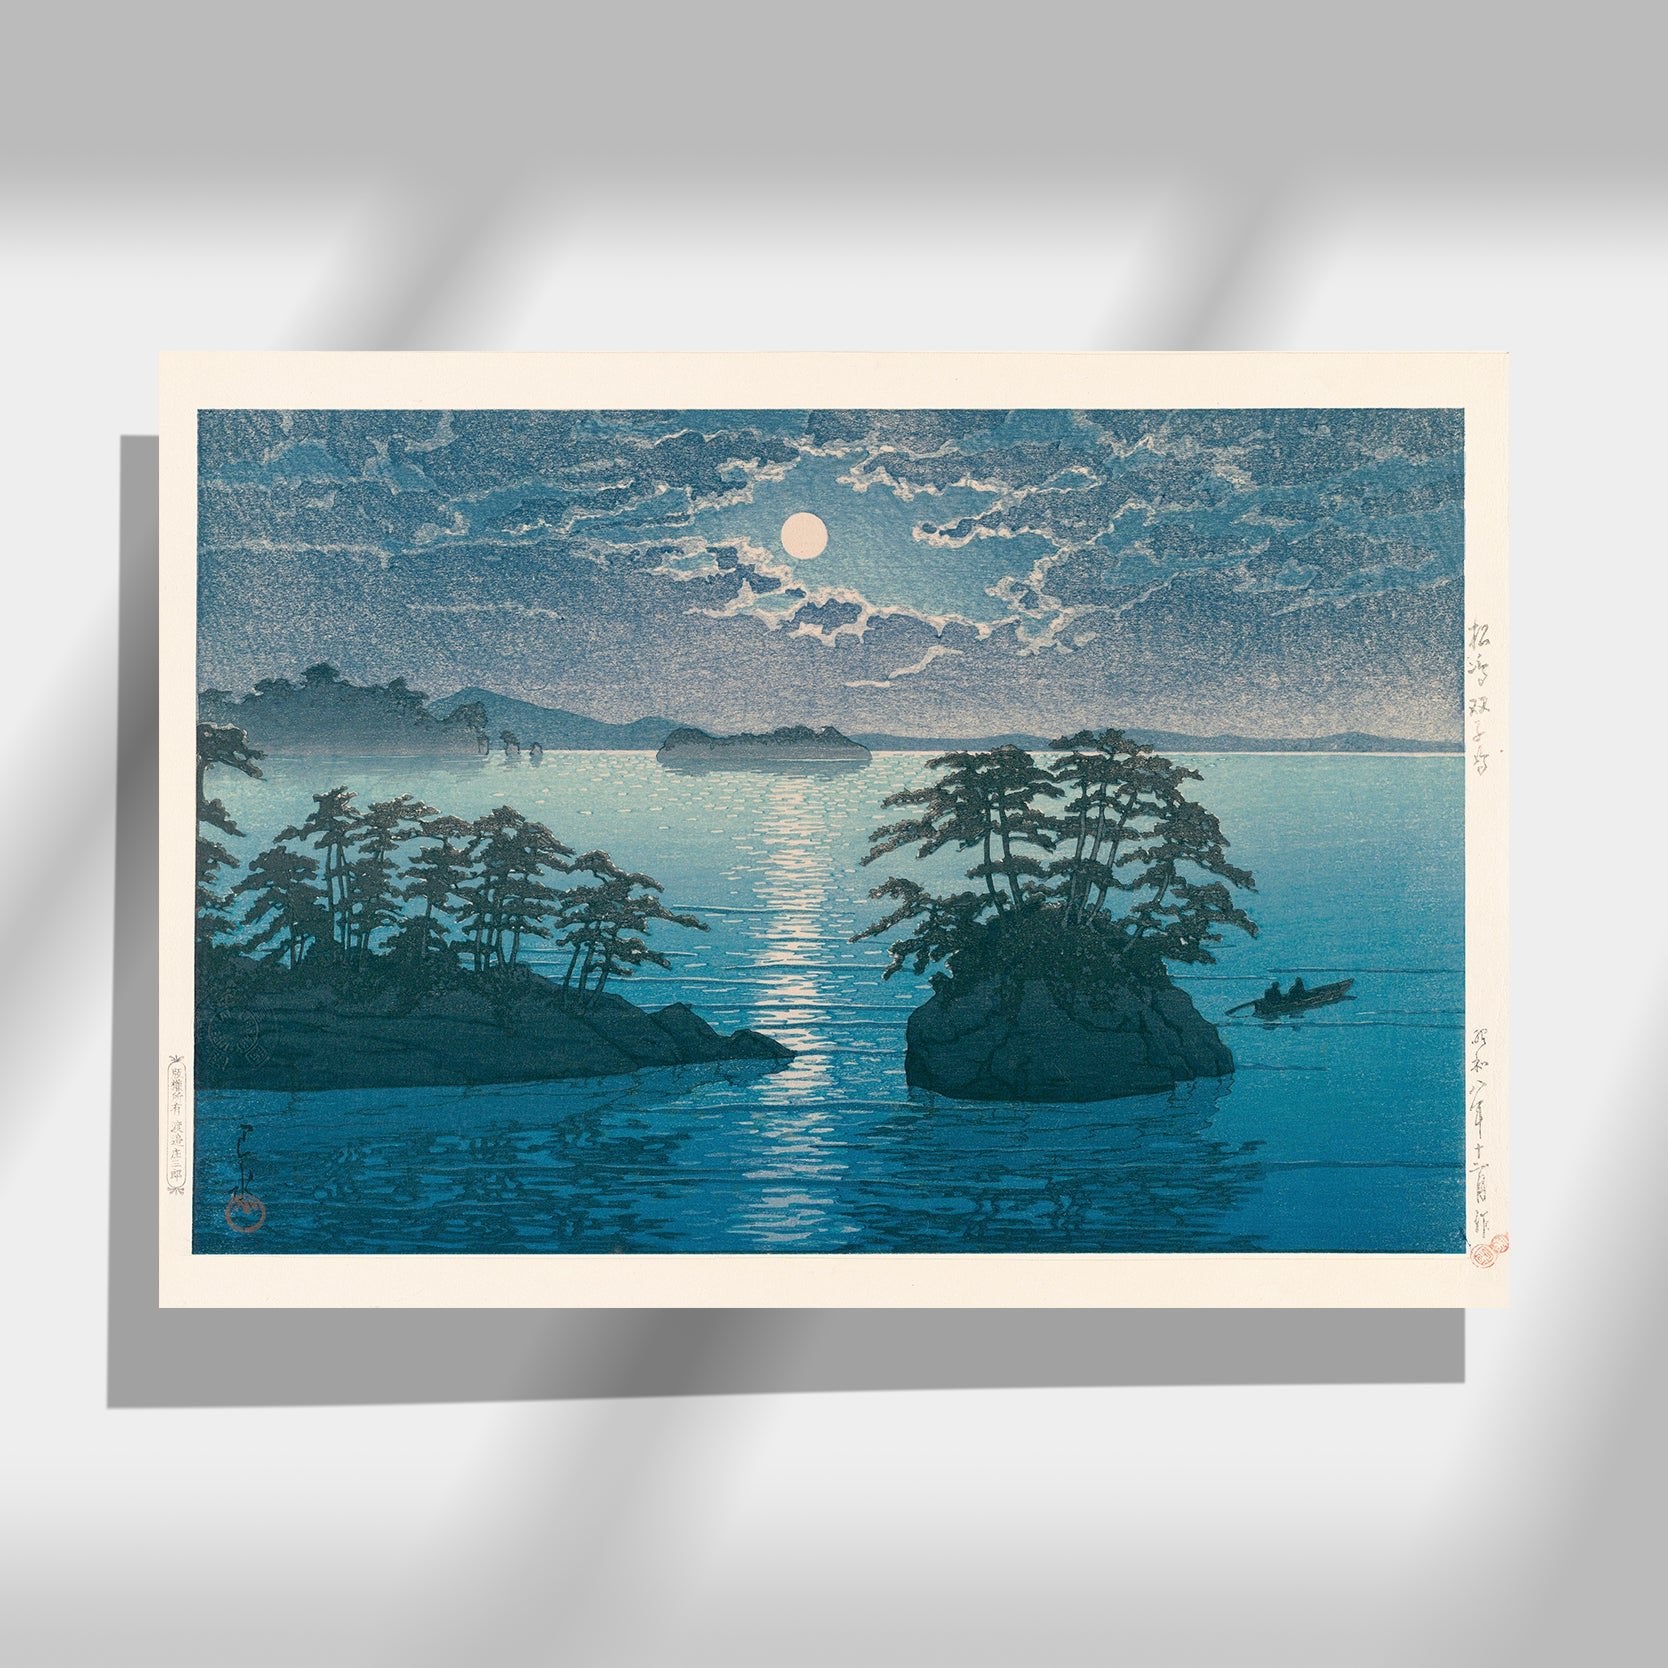 Japanese Art Poster by Kawase Hasui, featuring a serene moonlit night with small islands on the sea